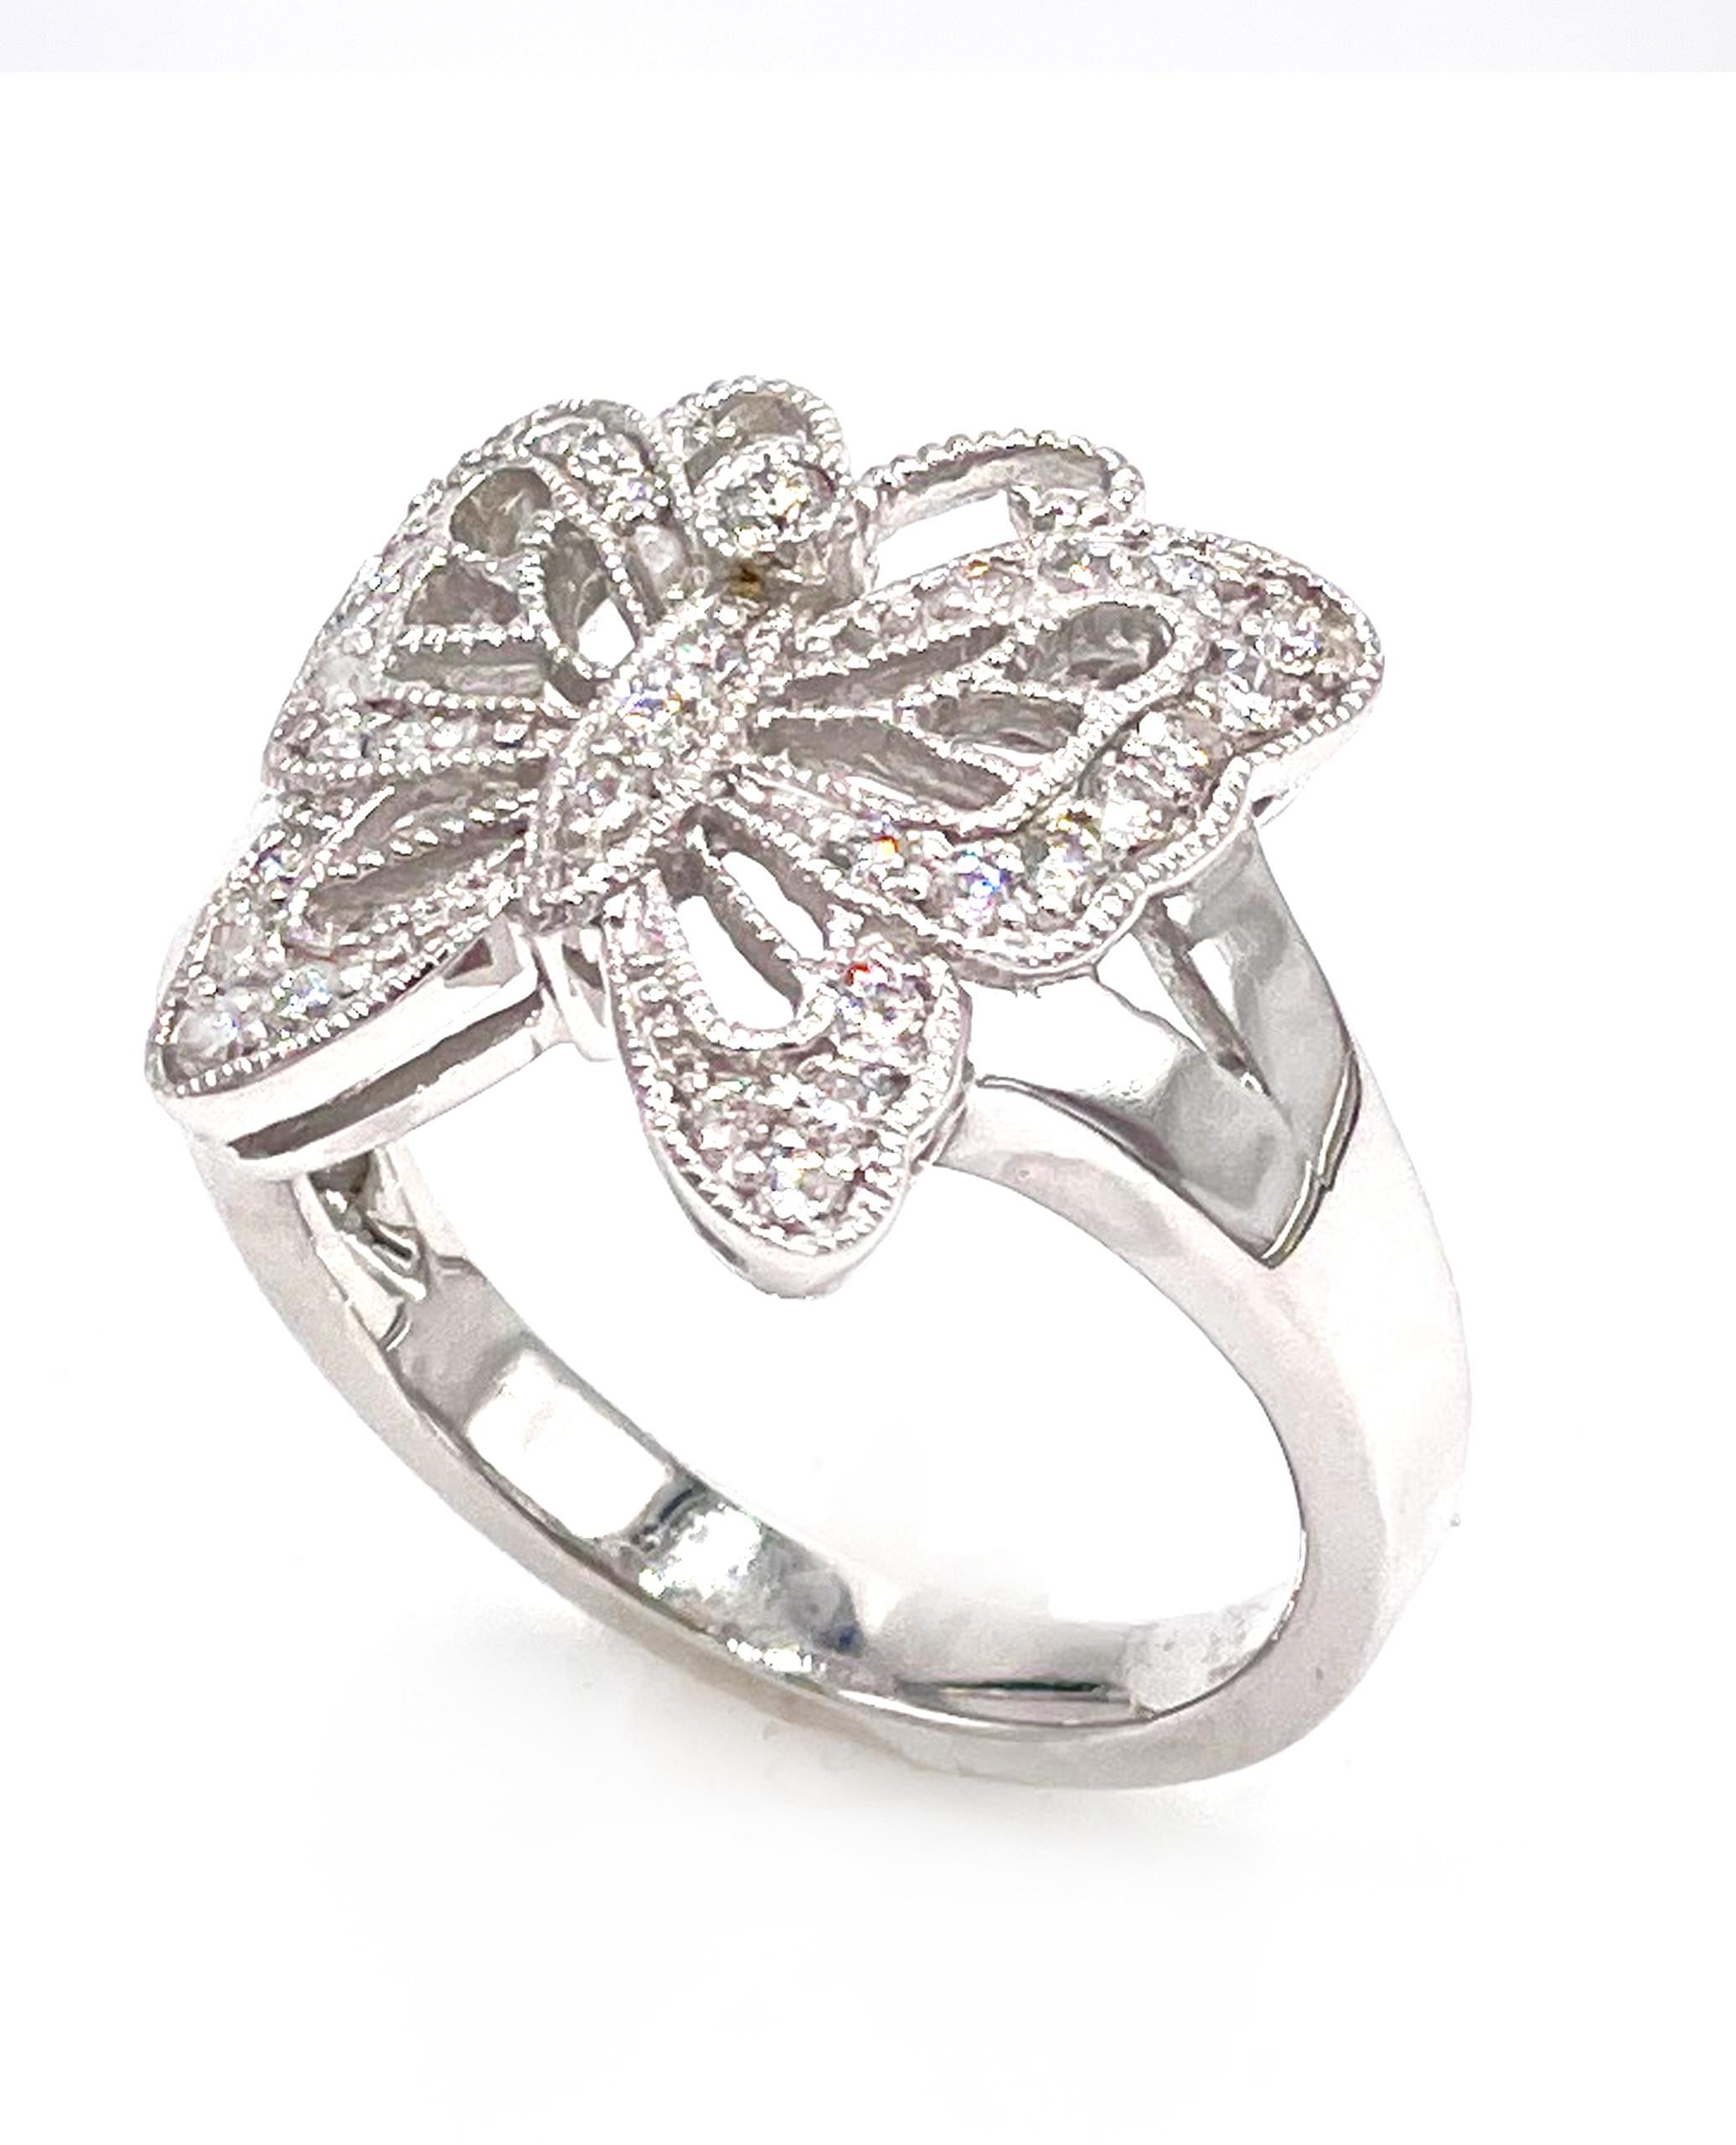 14K white gold butterfly ring furnished with 42 round brilliant-cut diamonds 0.34 carats total weight.

* Finger size 6.5
* Diamonds are H color, SI clarity